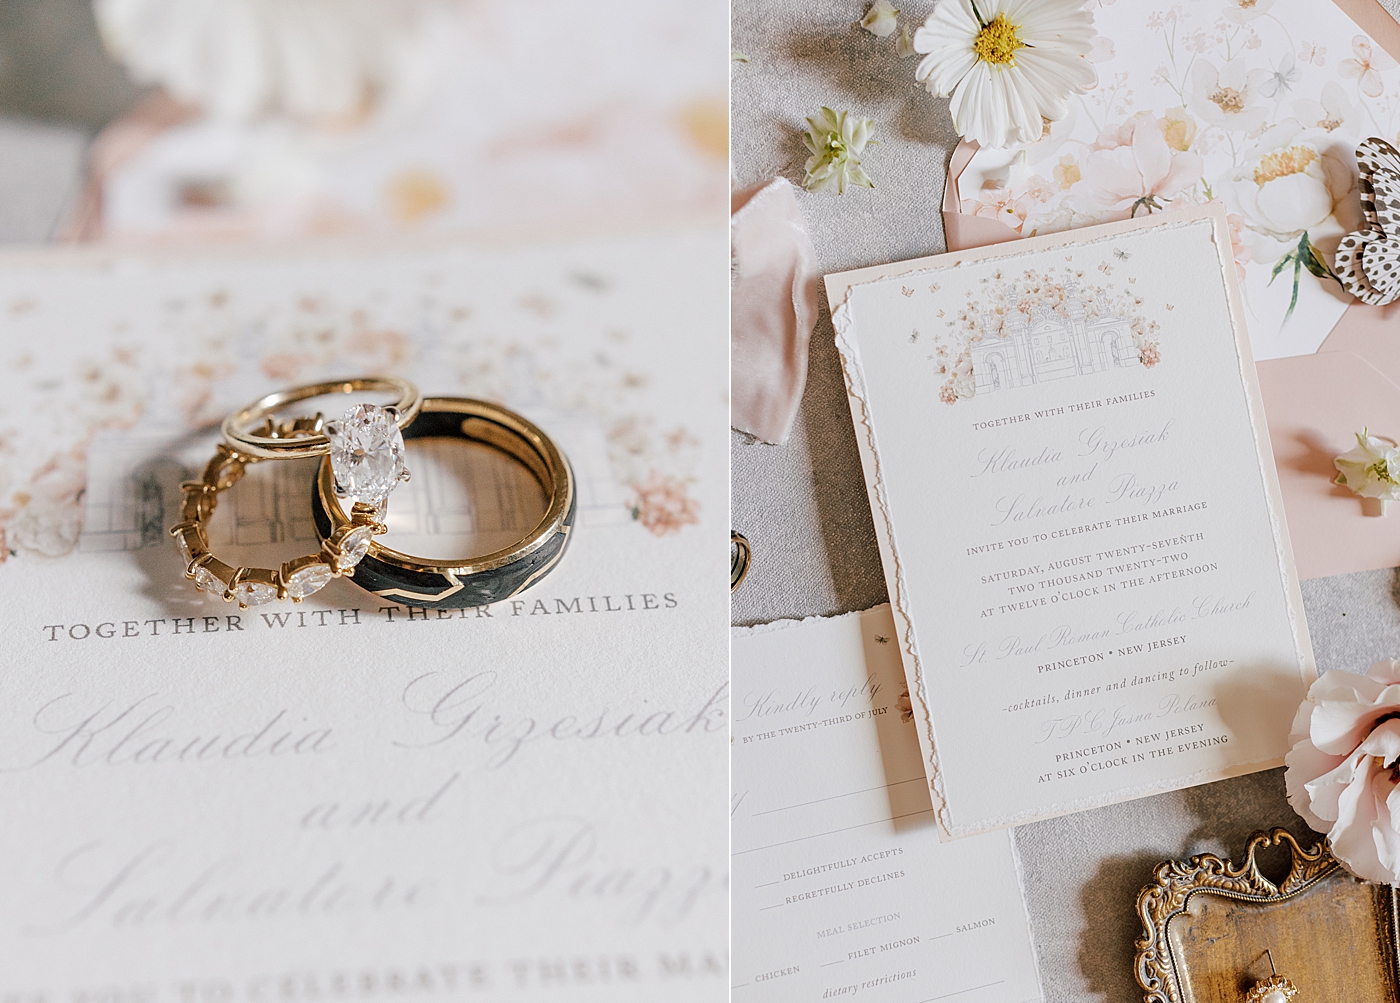 Wedding rings styled on an invitation suite | Image by Hope Helmuth Photography